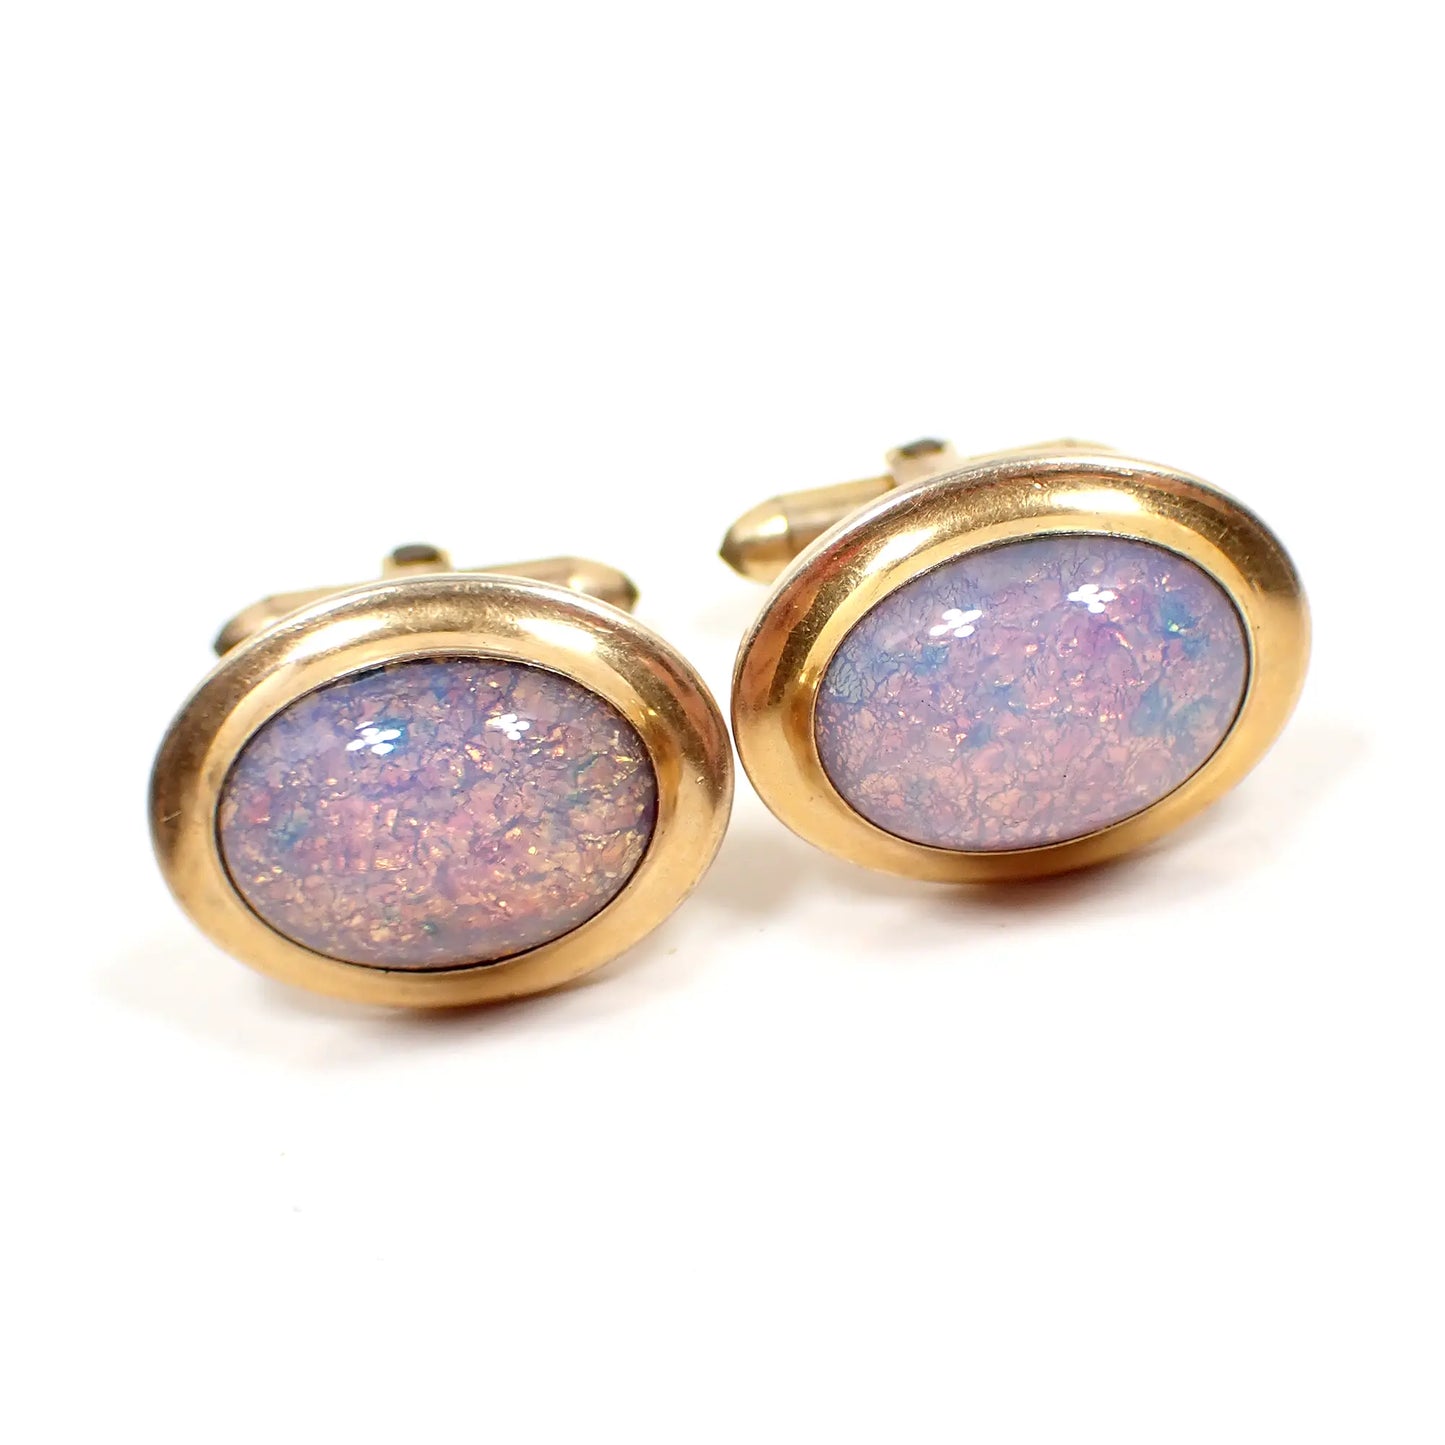 Correct Quality Faux Opal Vintage Cufflinks, Gold Tone Oval Cuff Links